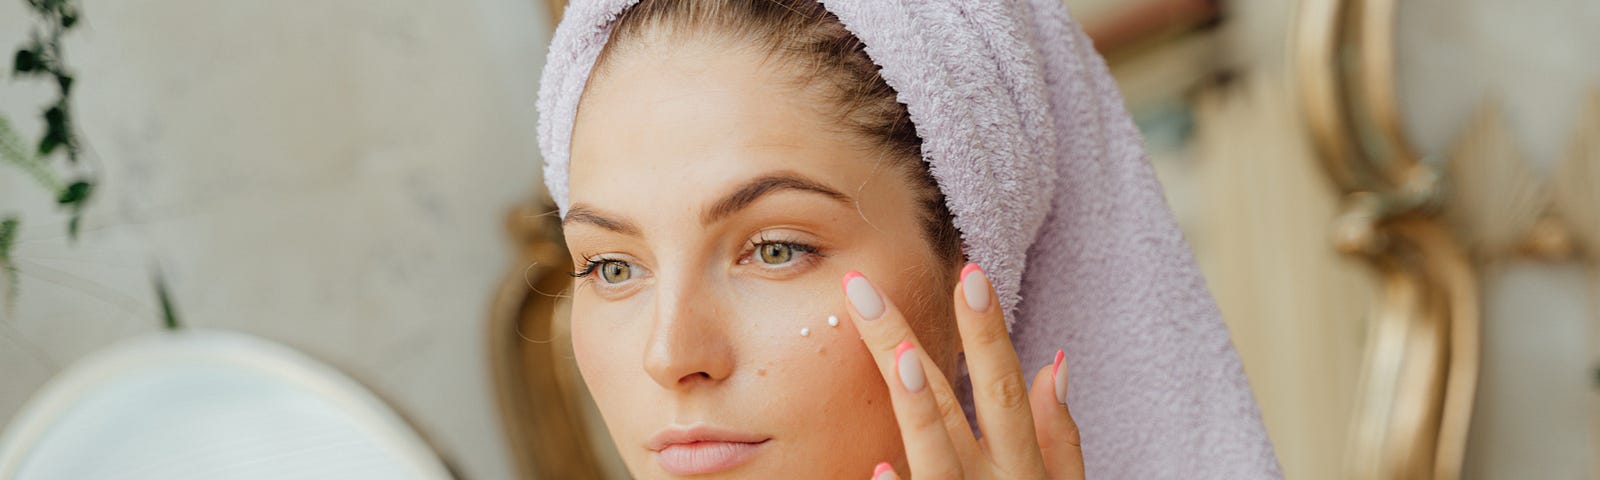 Woman With Head Towel Using Skin Cycling to be gentle with her skin while enjoying the anti-aging benefits of amazing skincare products